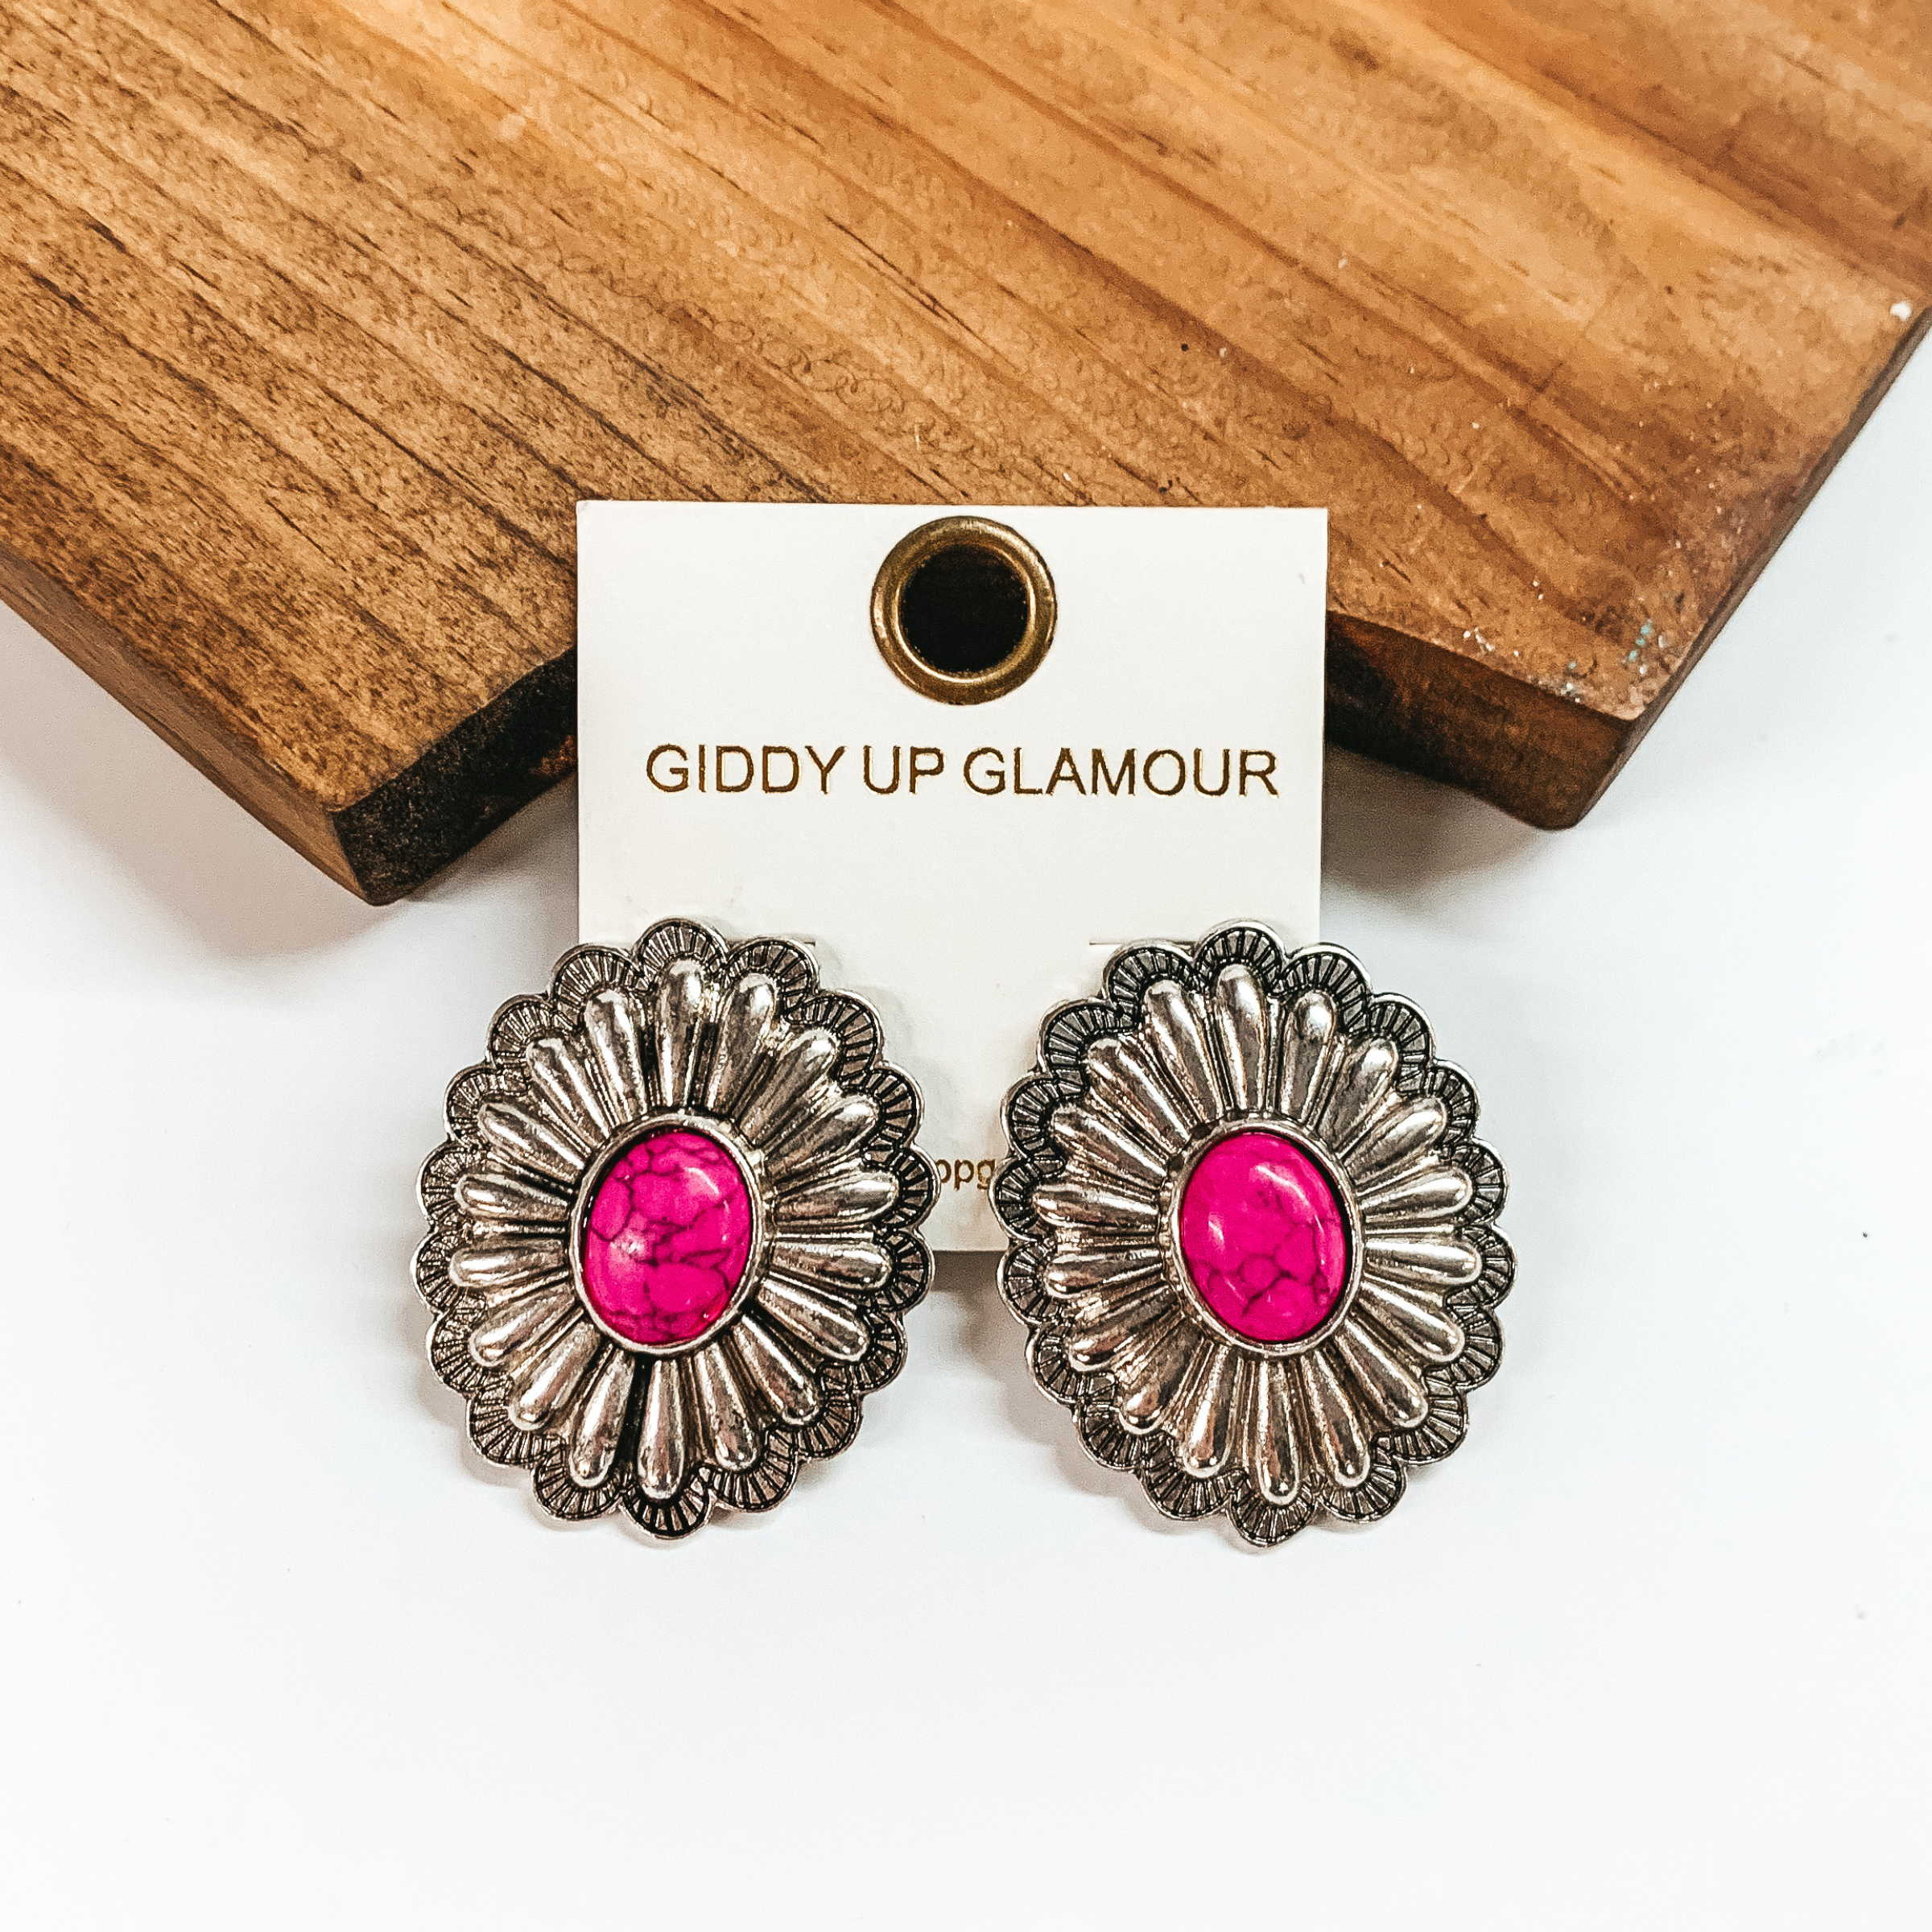 Silver Tone Concho Earrings with Faux Center Stone in Fuchsia Pink - Giddy Up Glamour Boutique